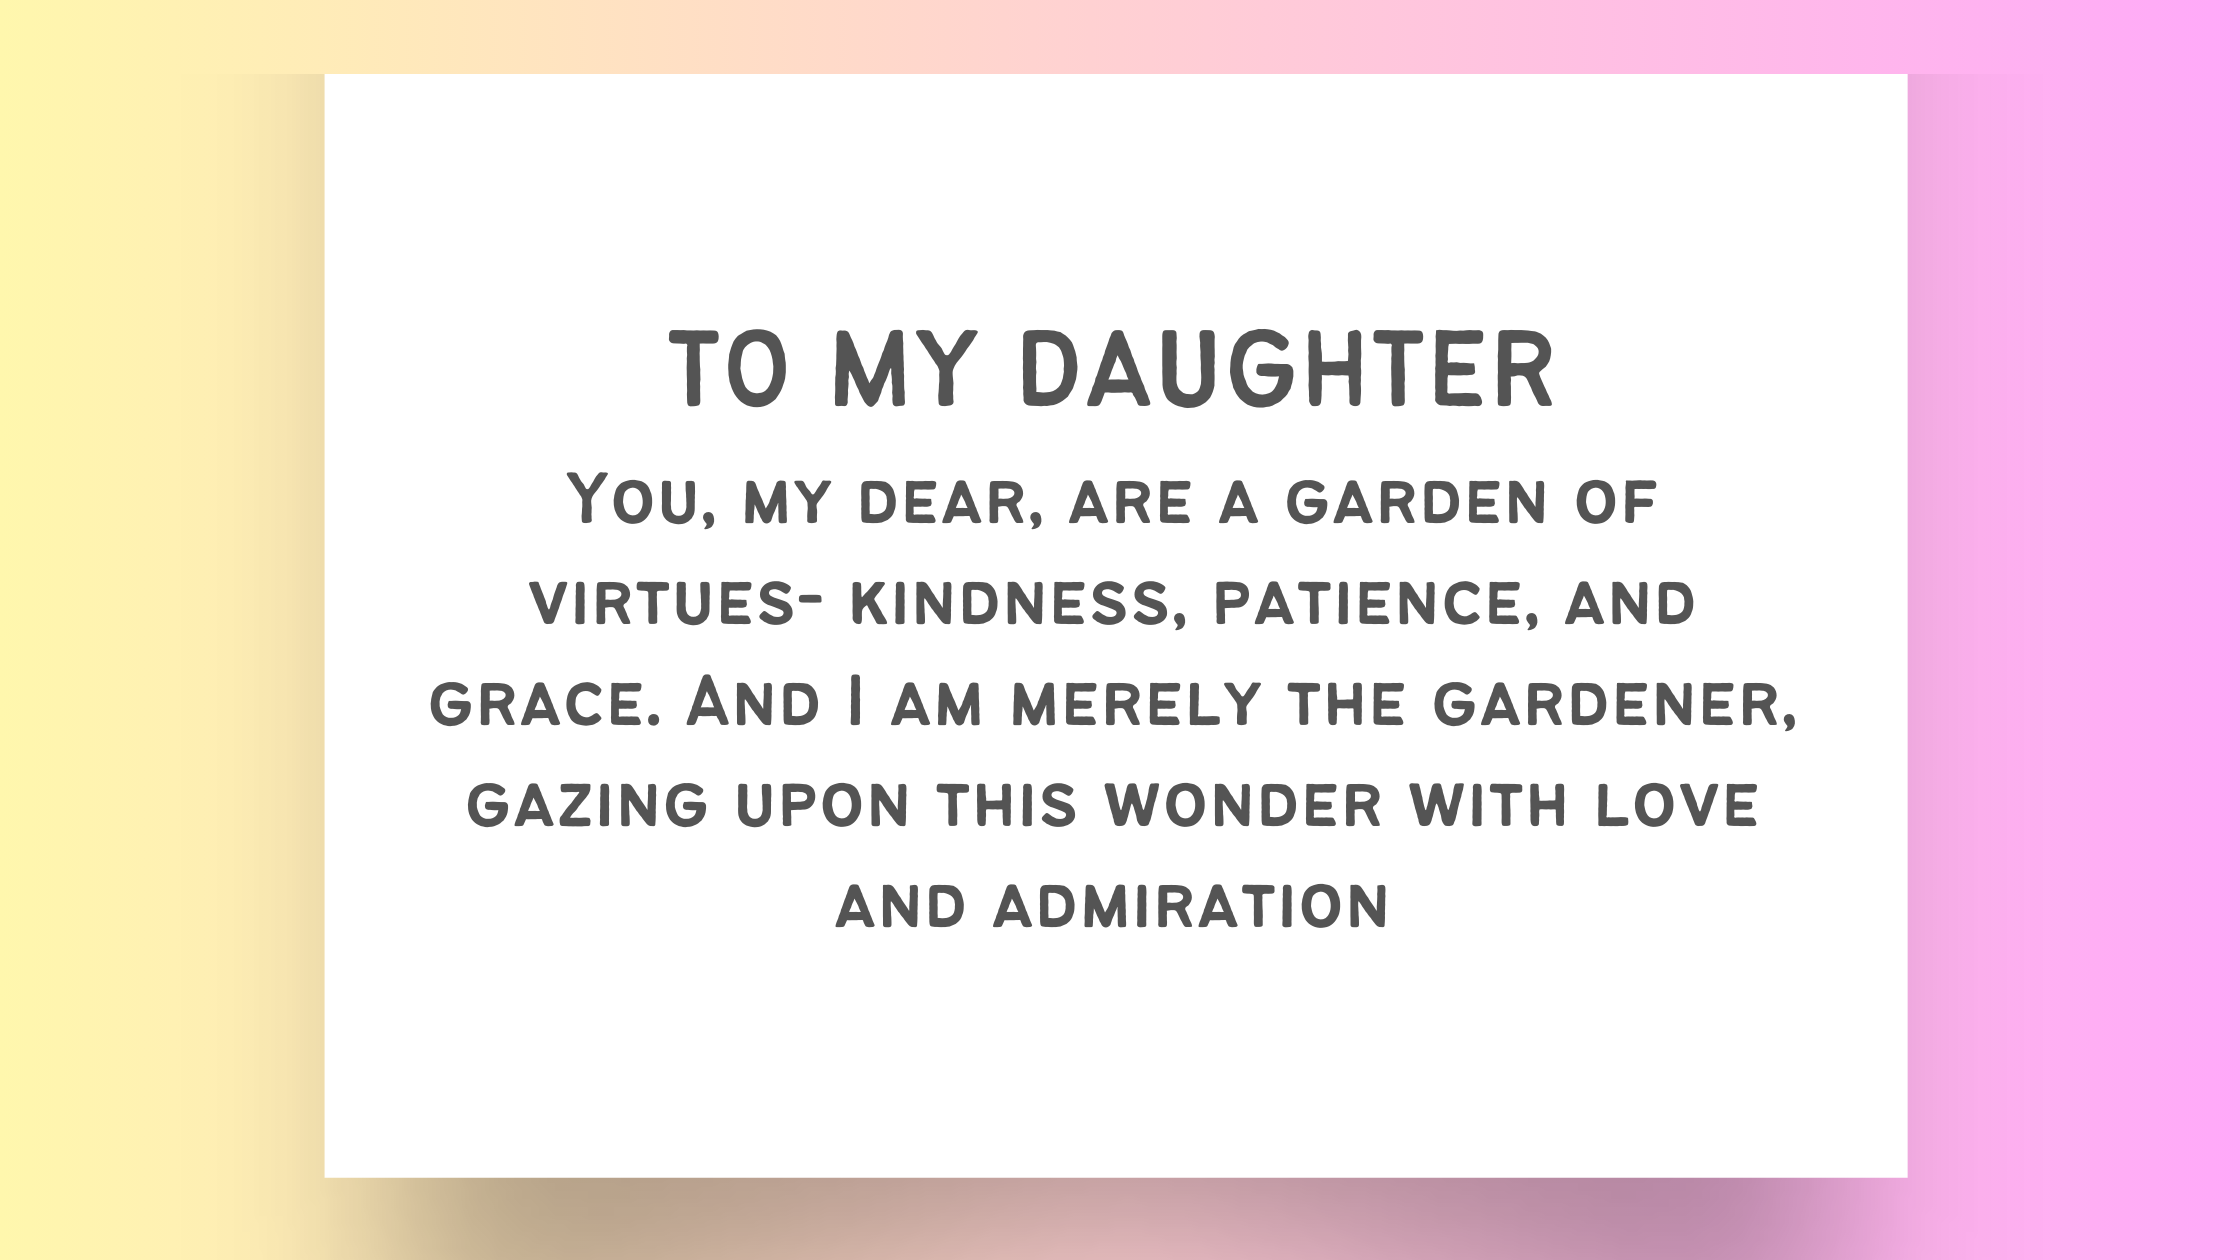 10 Expressive Phrases: A Mother's Loving Words for Lovely Daughter